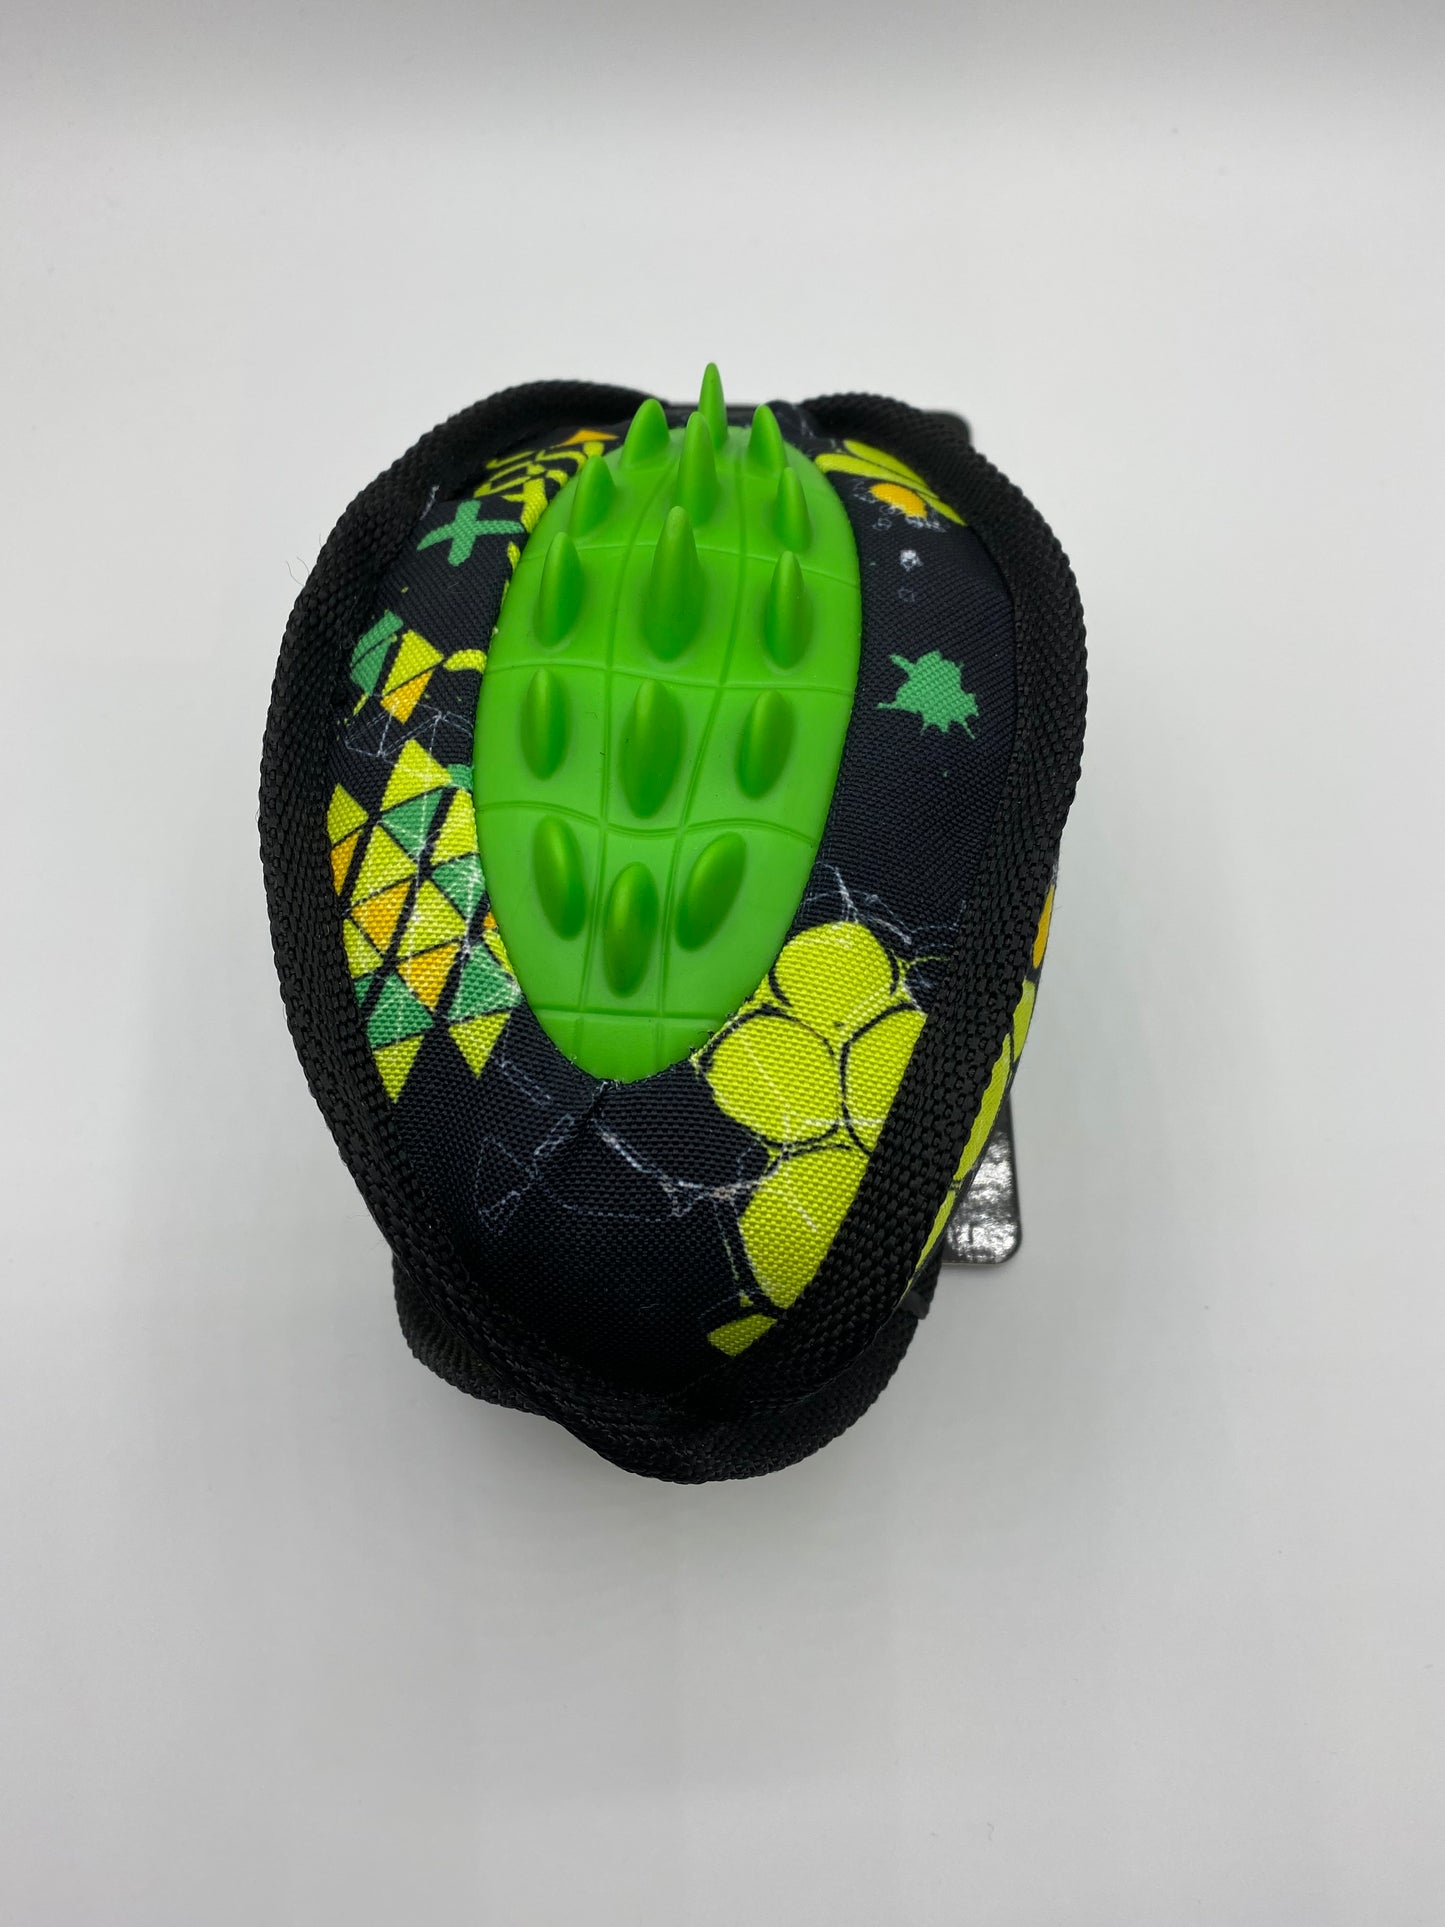 Canvas and Rubber Plush Rugby ball Dog Toy in Black and Green Size approx 20cm Long